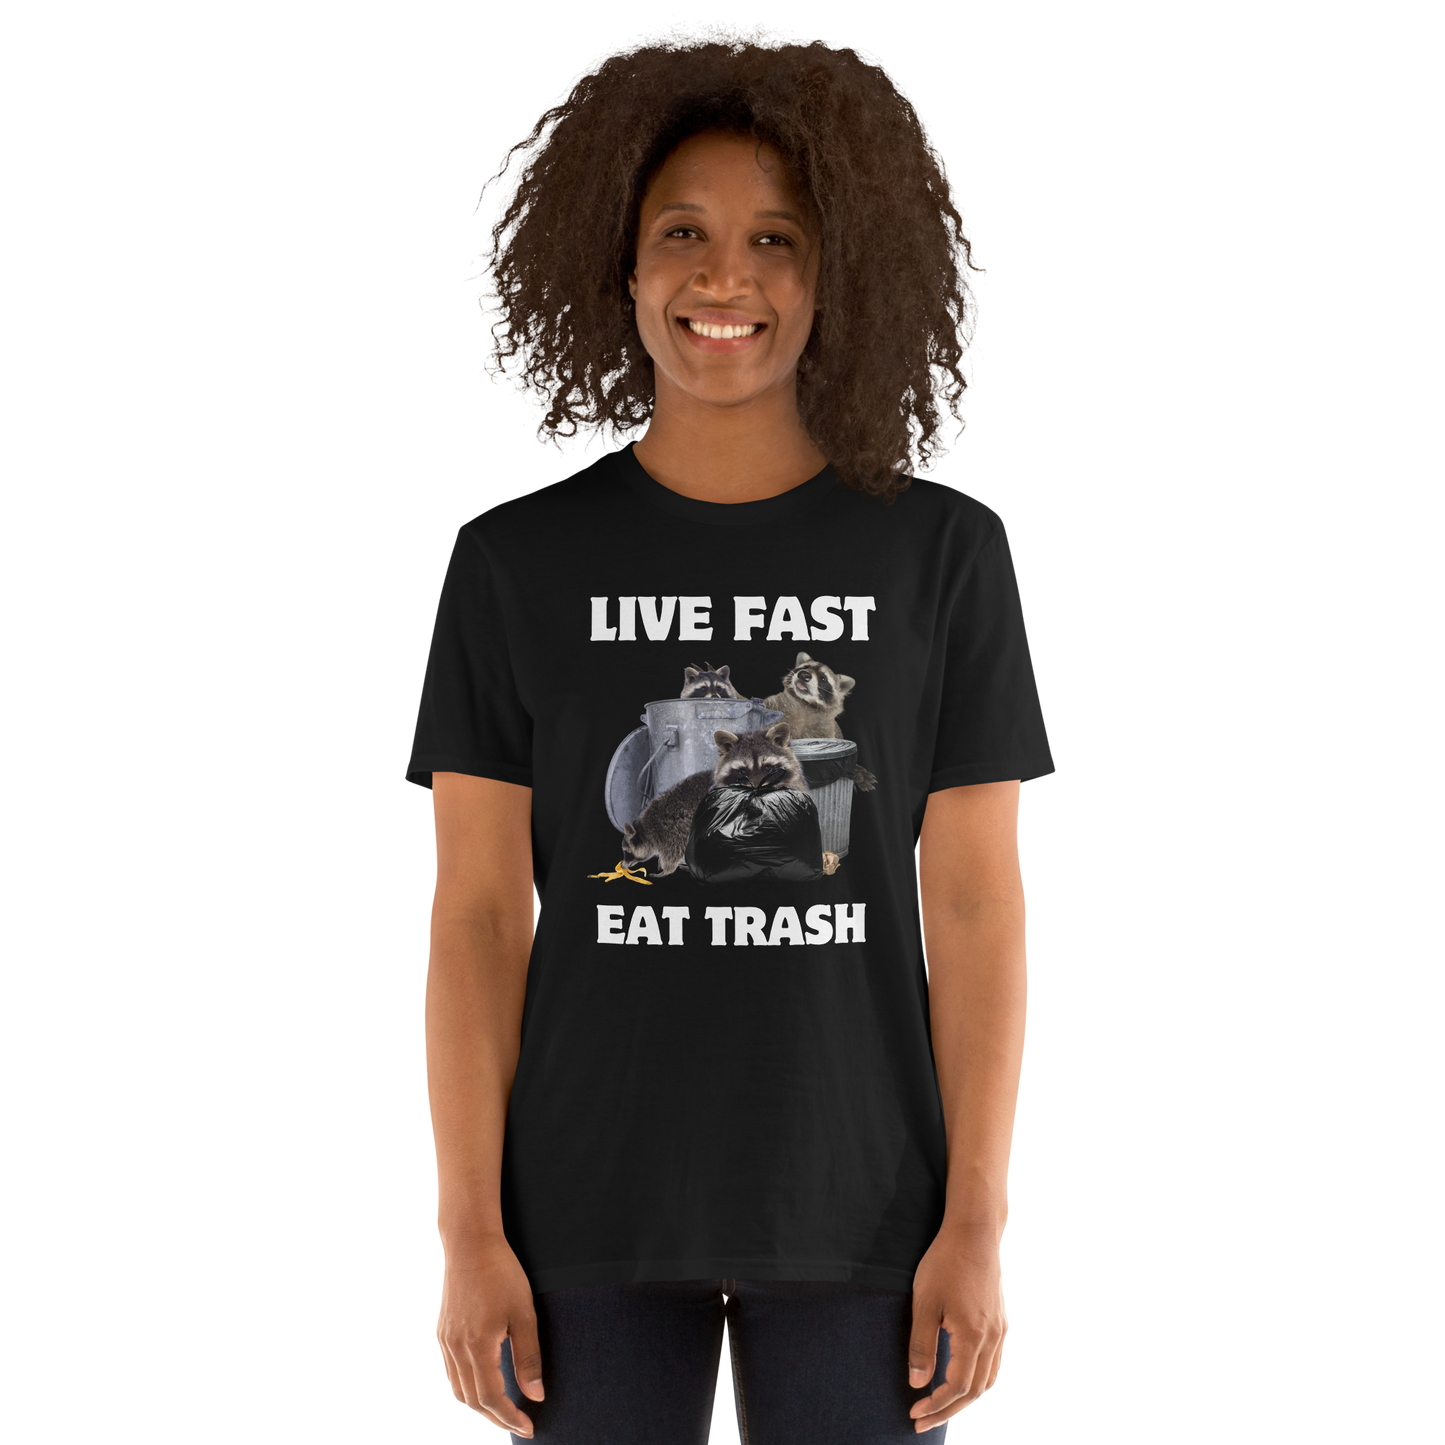 Smiling woman wearing a Black Raccoon T-Shirt featuring a hilarious Live Fast Eat Trash graphic on the chest - Funny Graphic Raccoon T-shirts - Boozy Fox